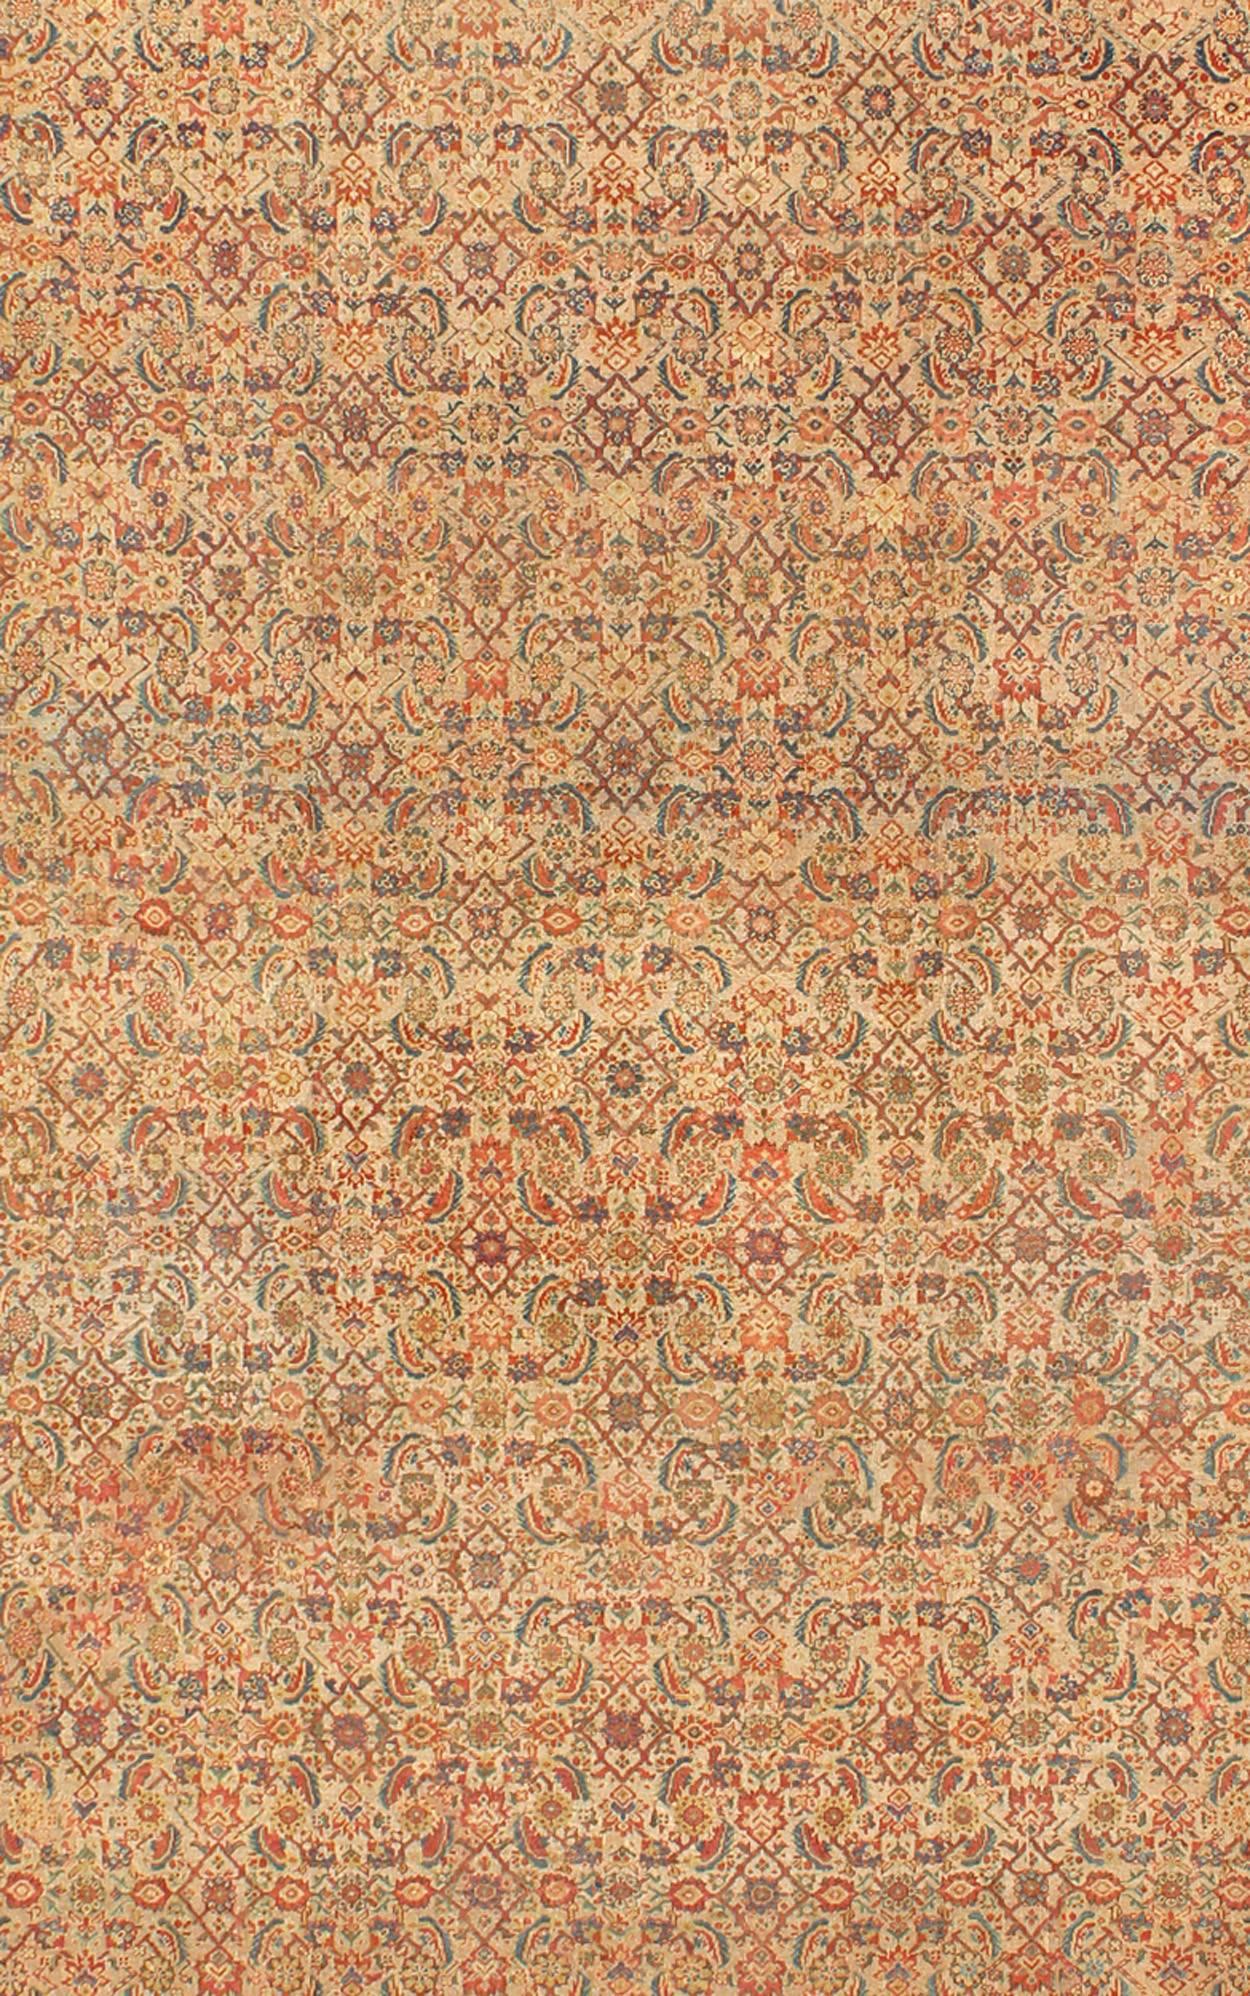 Grandiose Antique Persian Sultanabad Rug in Tan Background, Rust Red, Green In Good Condition For Sale In Atlanta, GA